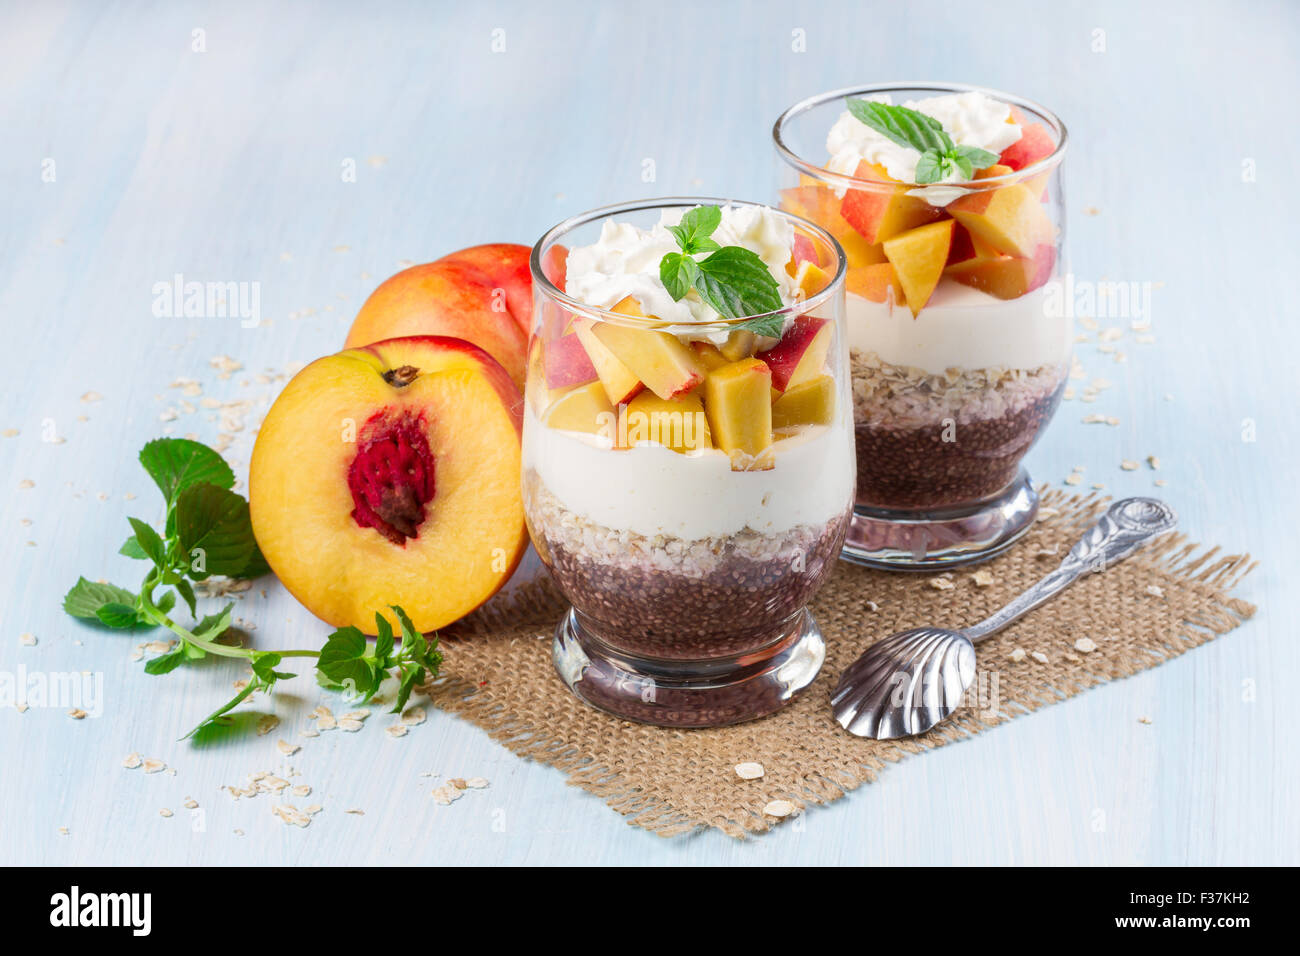 Chia seeds with oat flakes and peaches. Horizontal image. Stock Photo